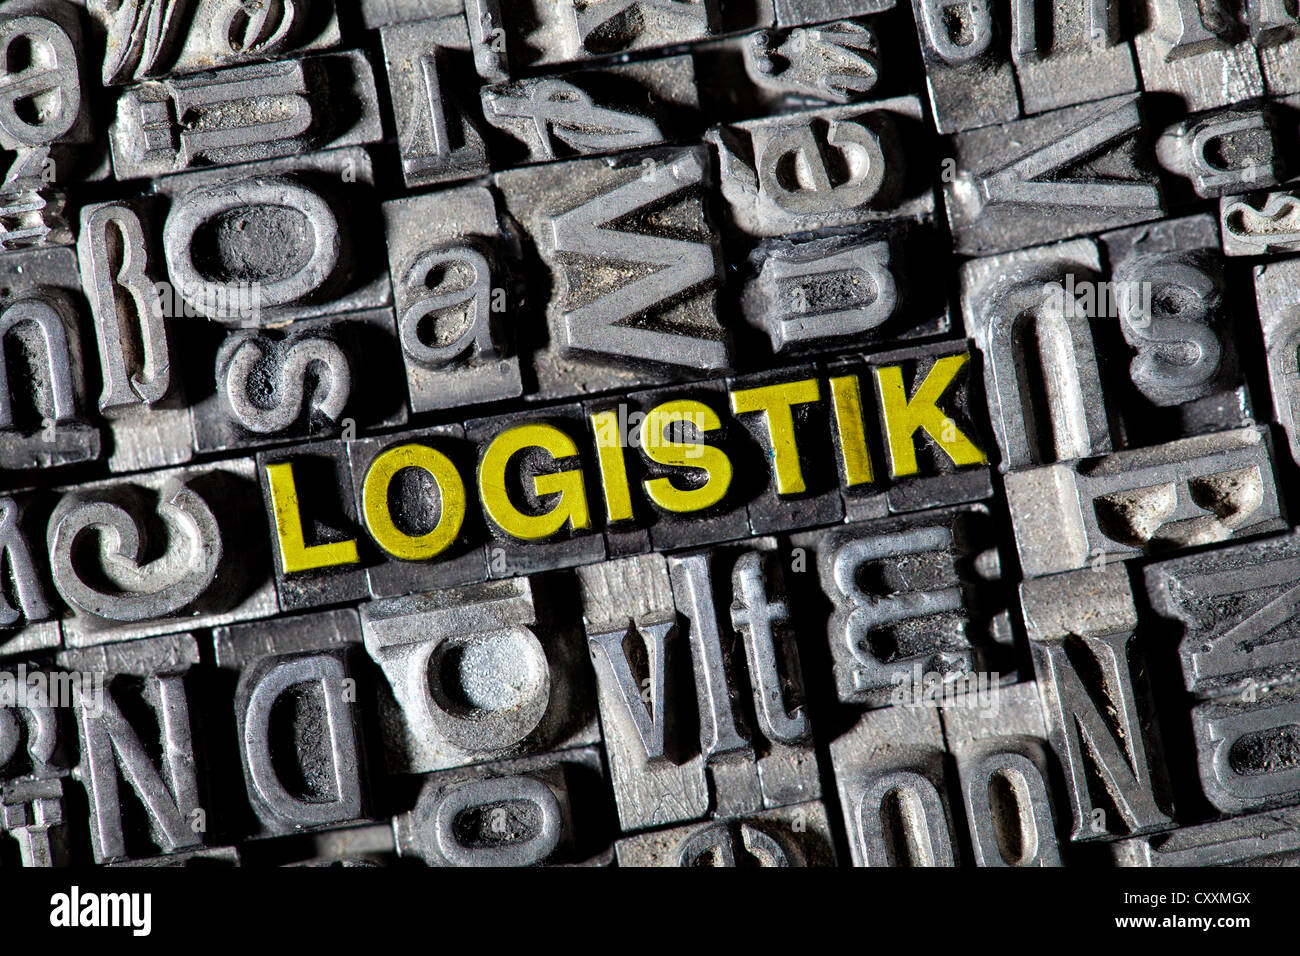 Old lead letters forming the word 'Logistik', German for logistics Stock Photo